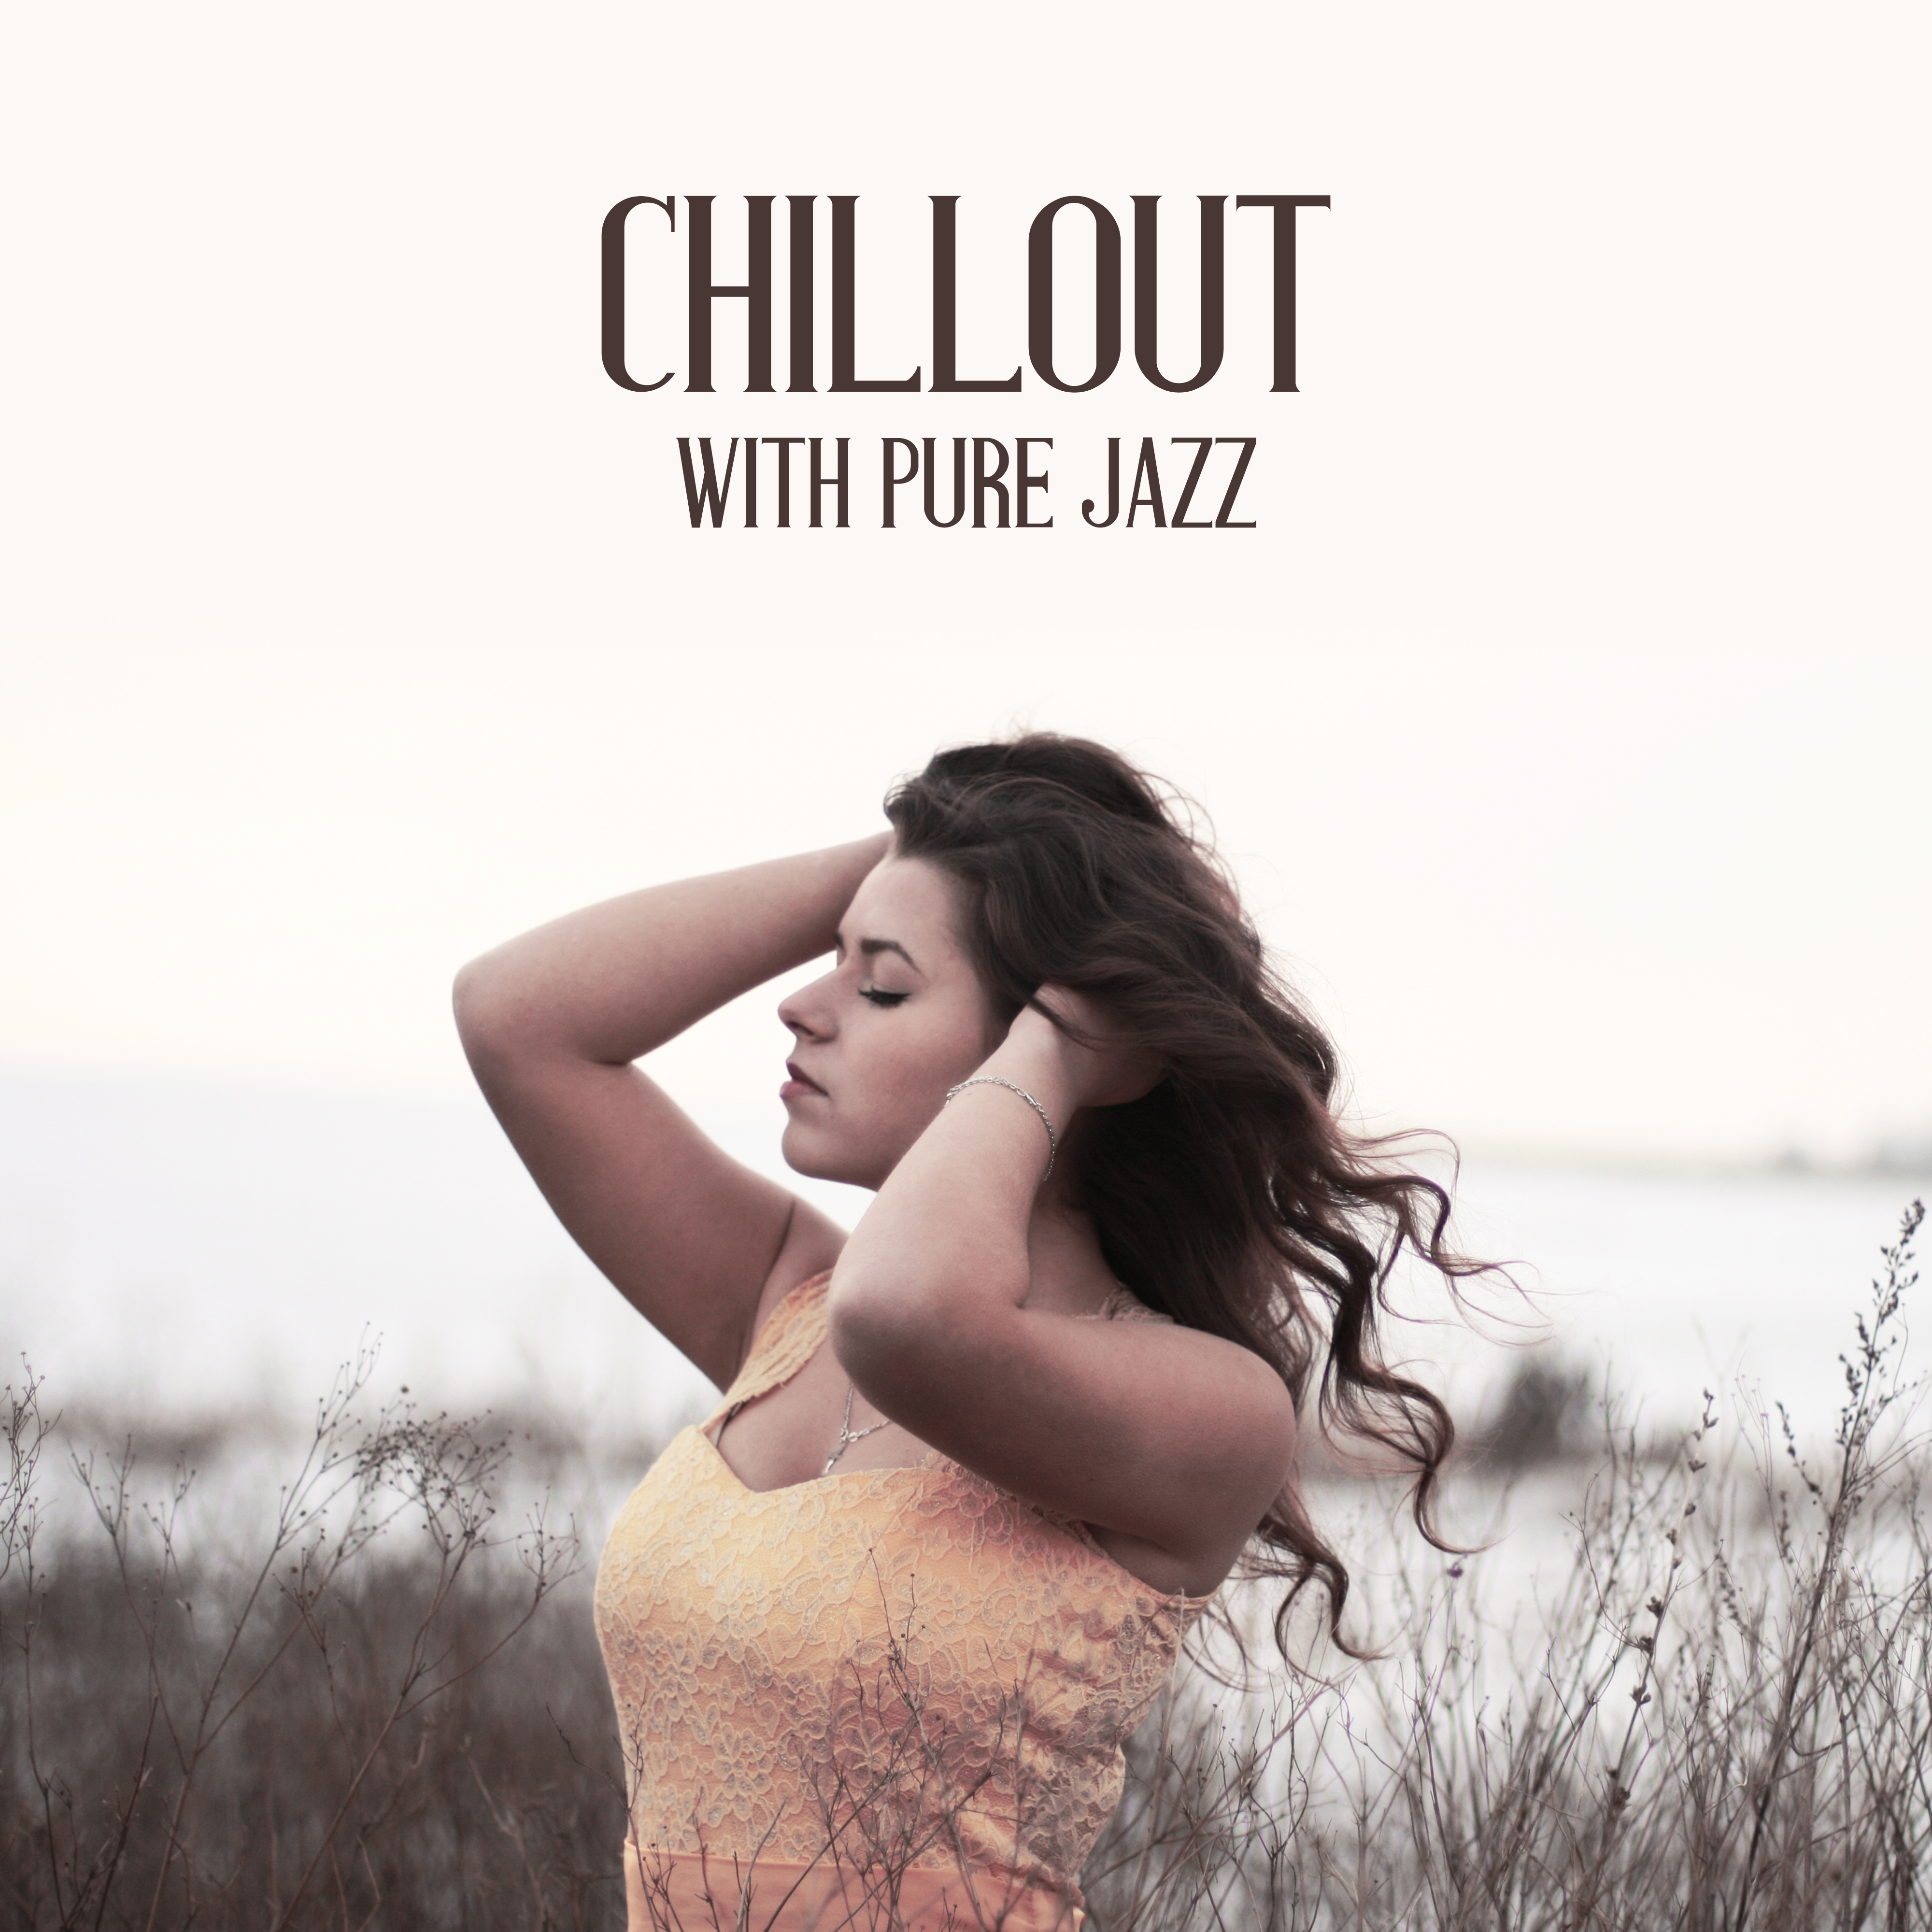 Chillout with Pure Jazz